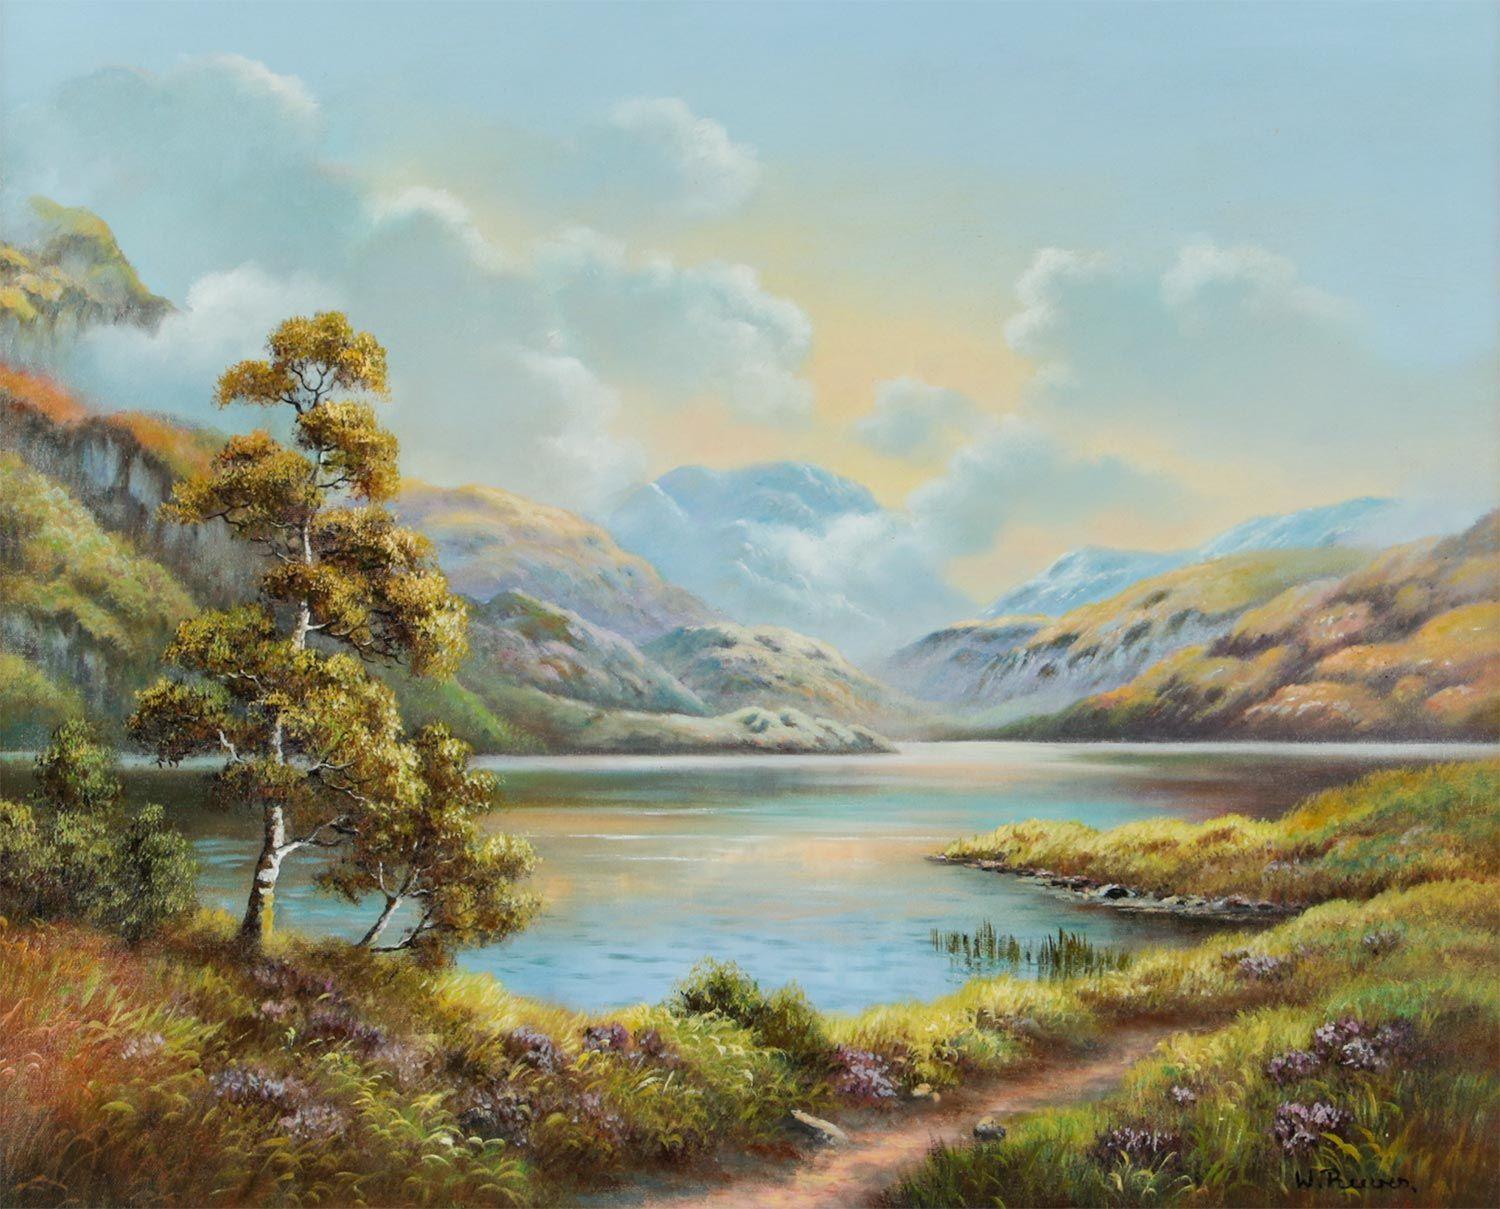 Oil Painting of Loch in the Scottish Highlands by 20th Century British Artist Wendy Reeves. 

Art measures 20 x 16 inches
Frame measures 29 x 25 inches (frame commensurate with age) 

Wendy Reeves garnered acclaim for her Scottish Highland and